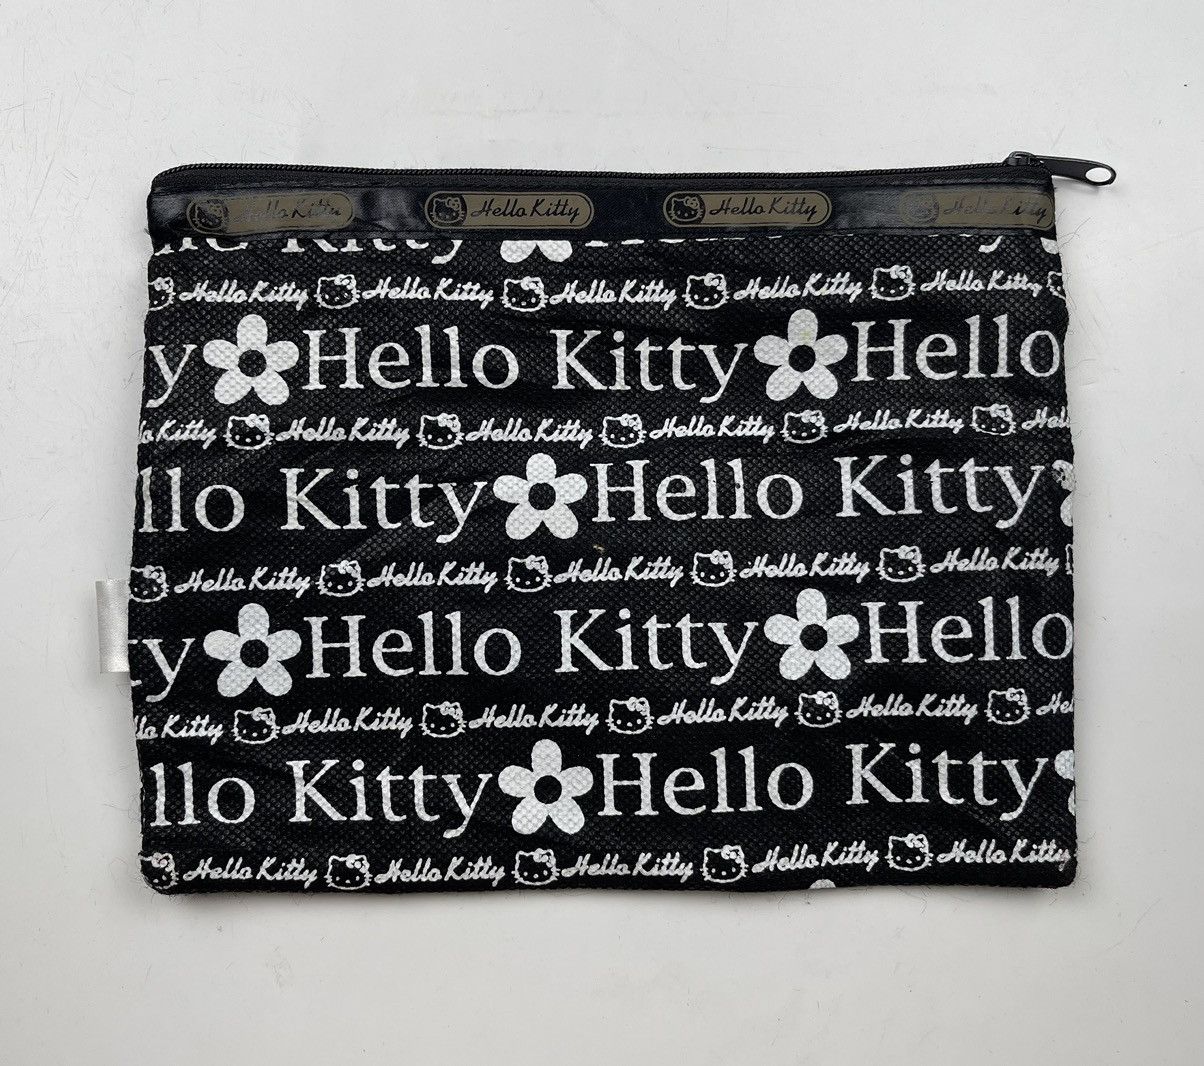 Japanese Brand - hello kitty bag small pouch tc24 - 5